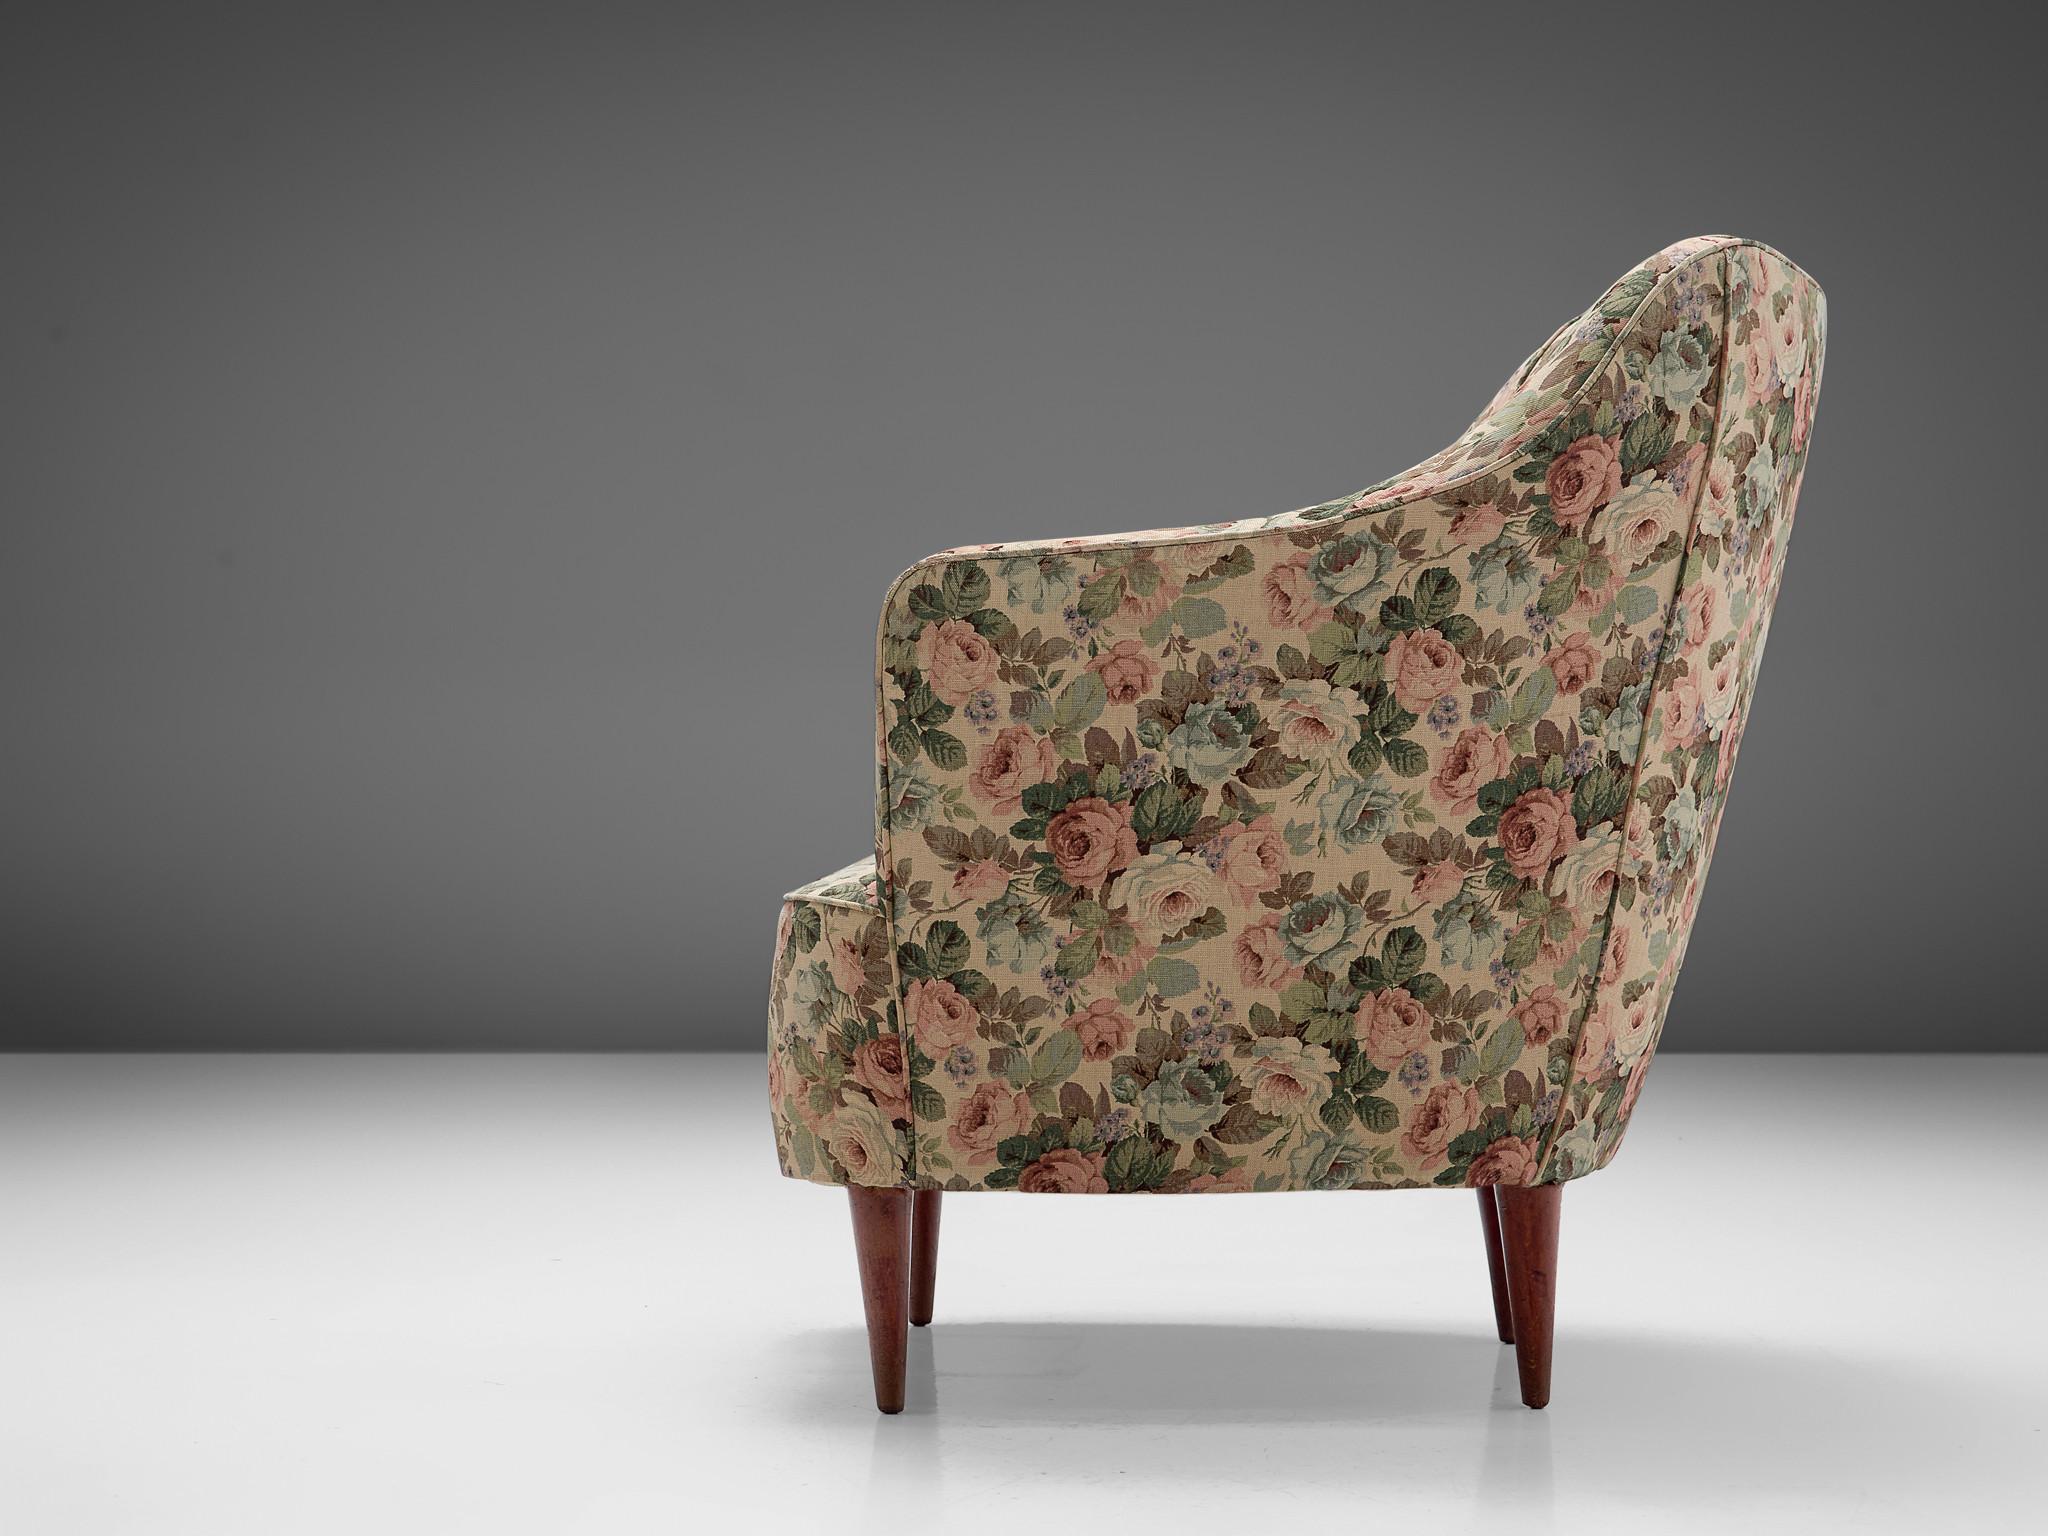 Mid-20th Century Italian Club Chair with Floral Upholstery For Sale